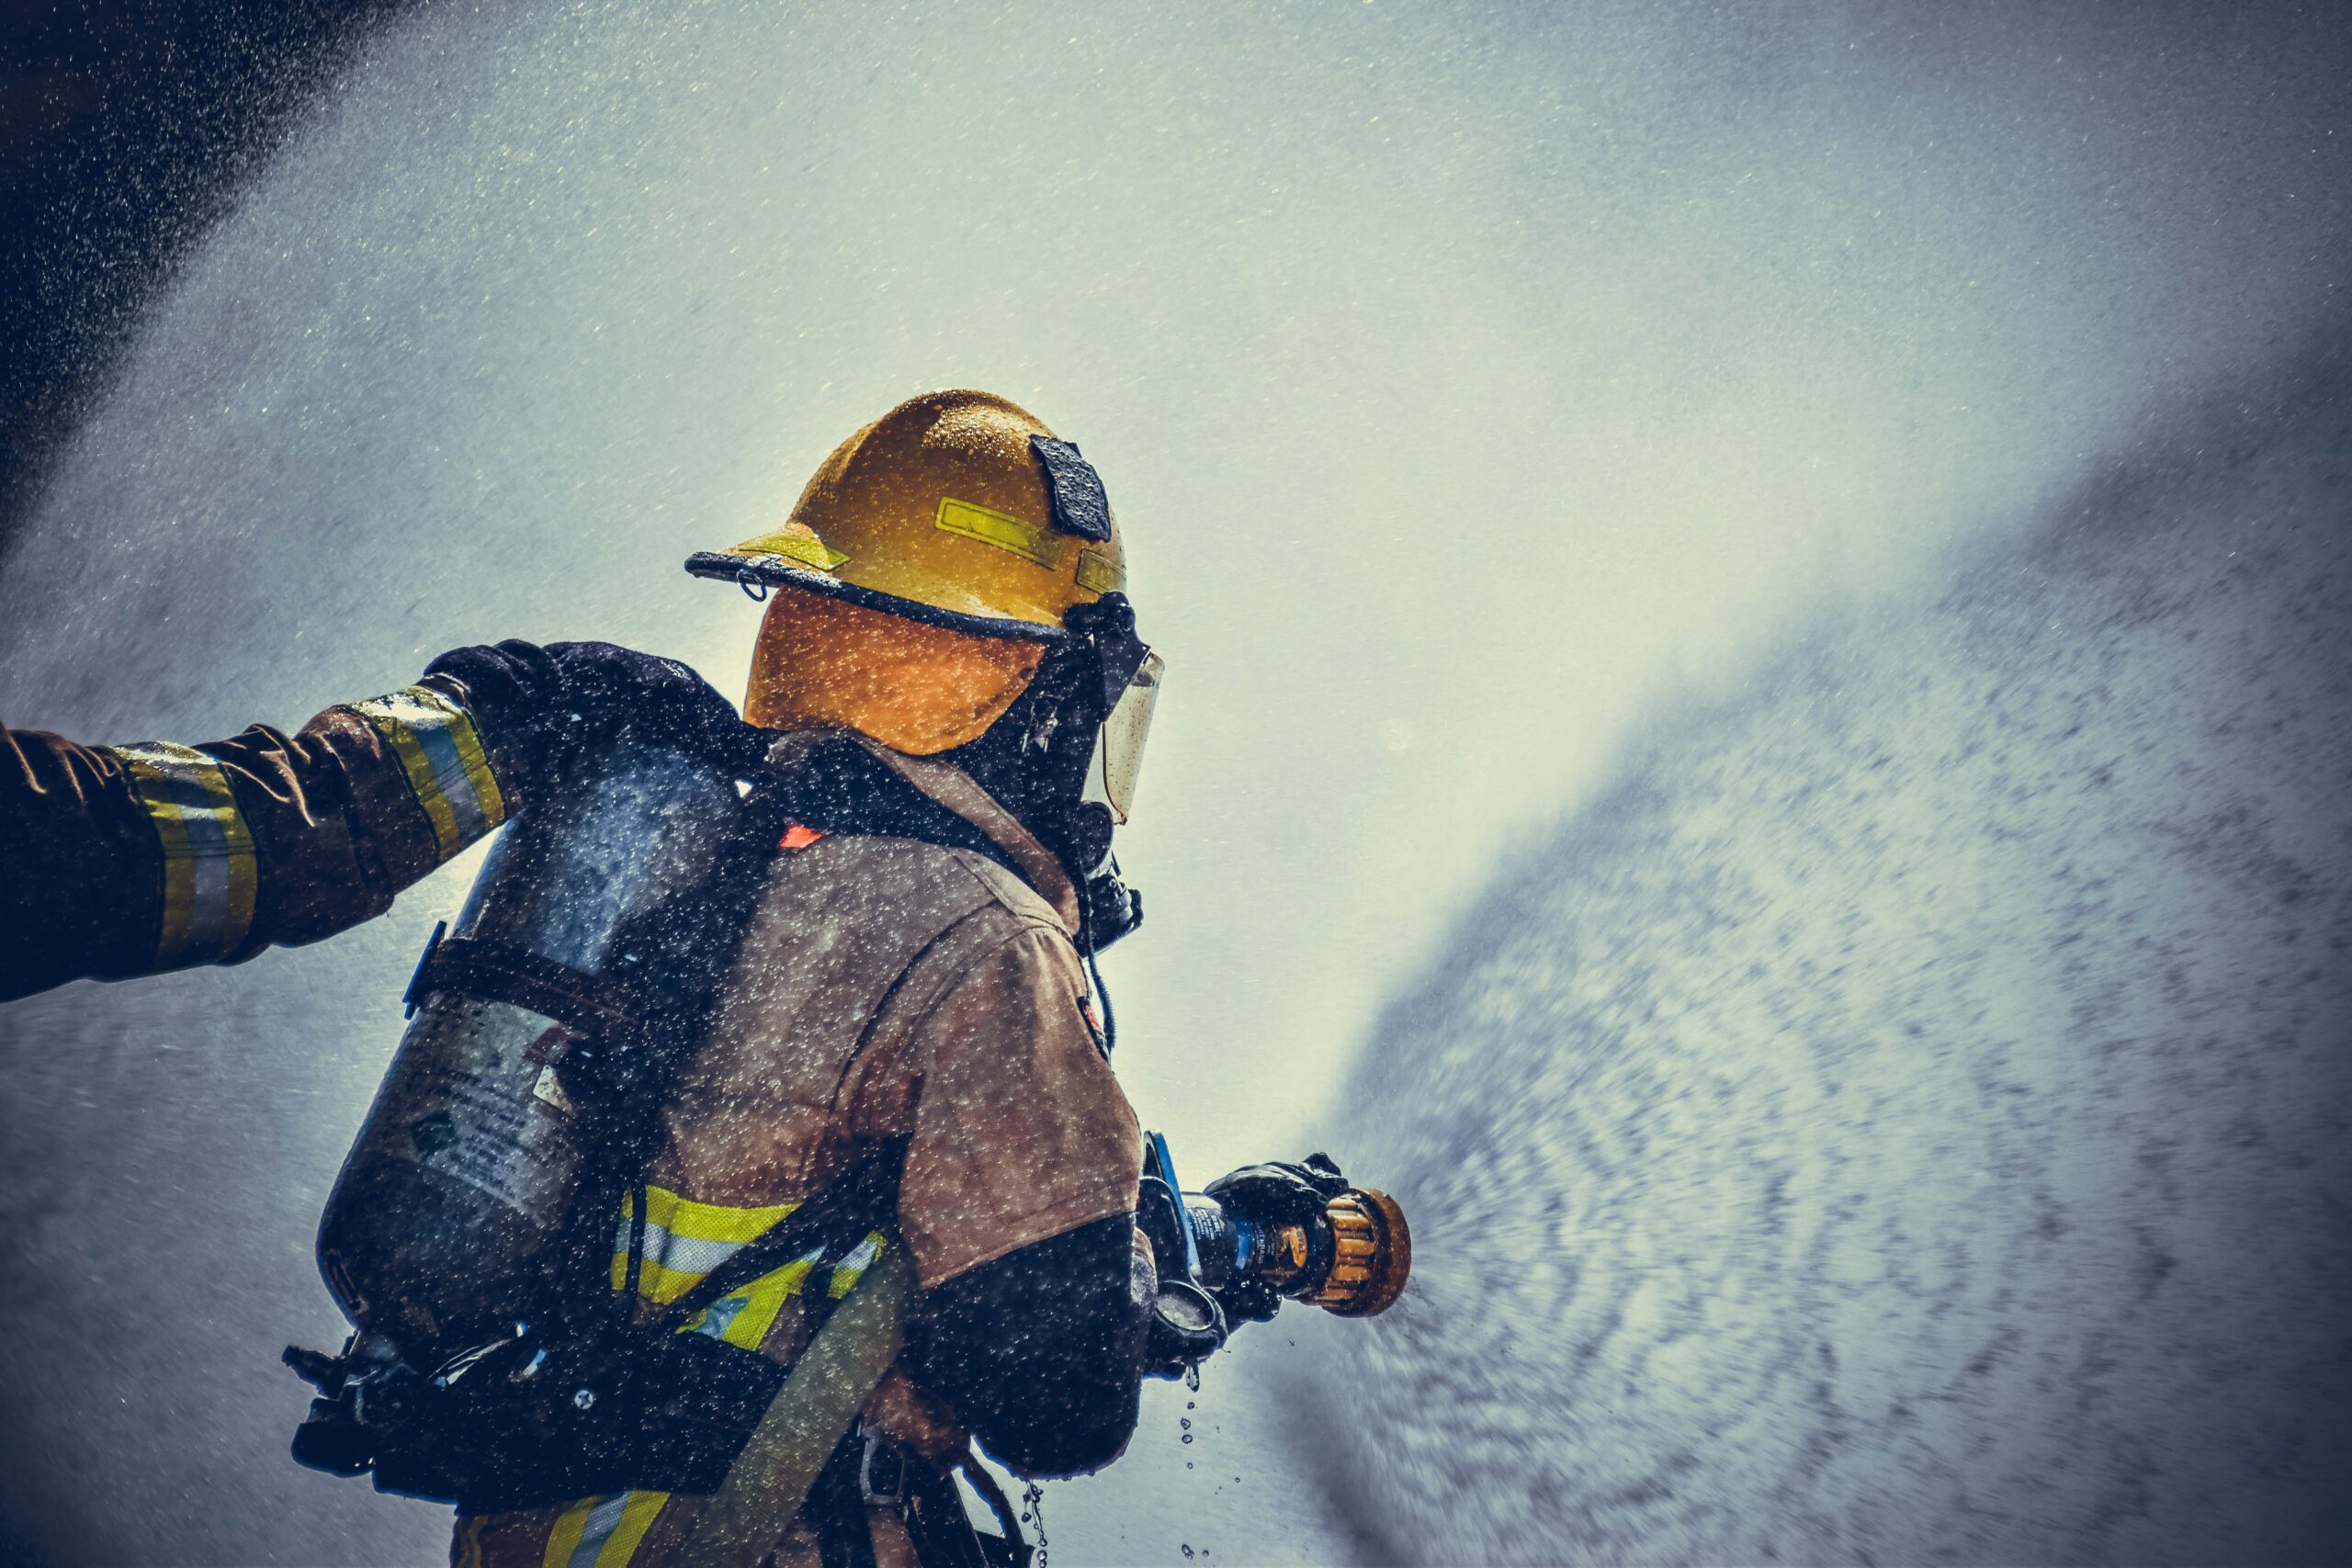 A firefighter holding a firehose at full blast.